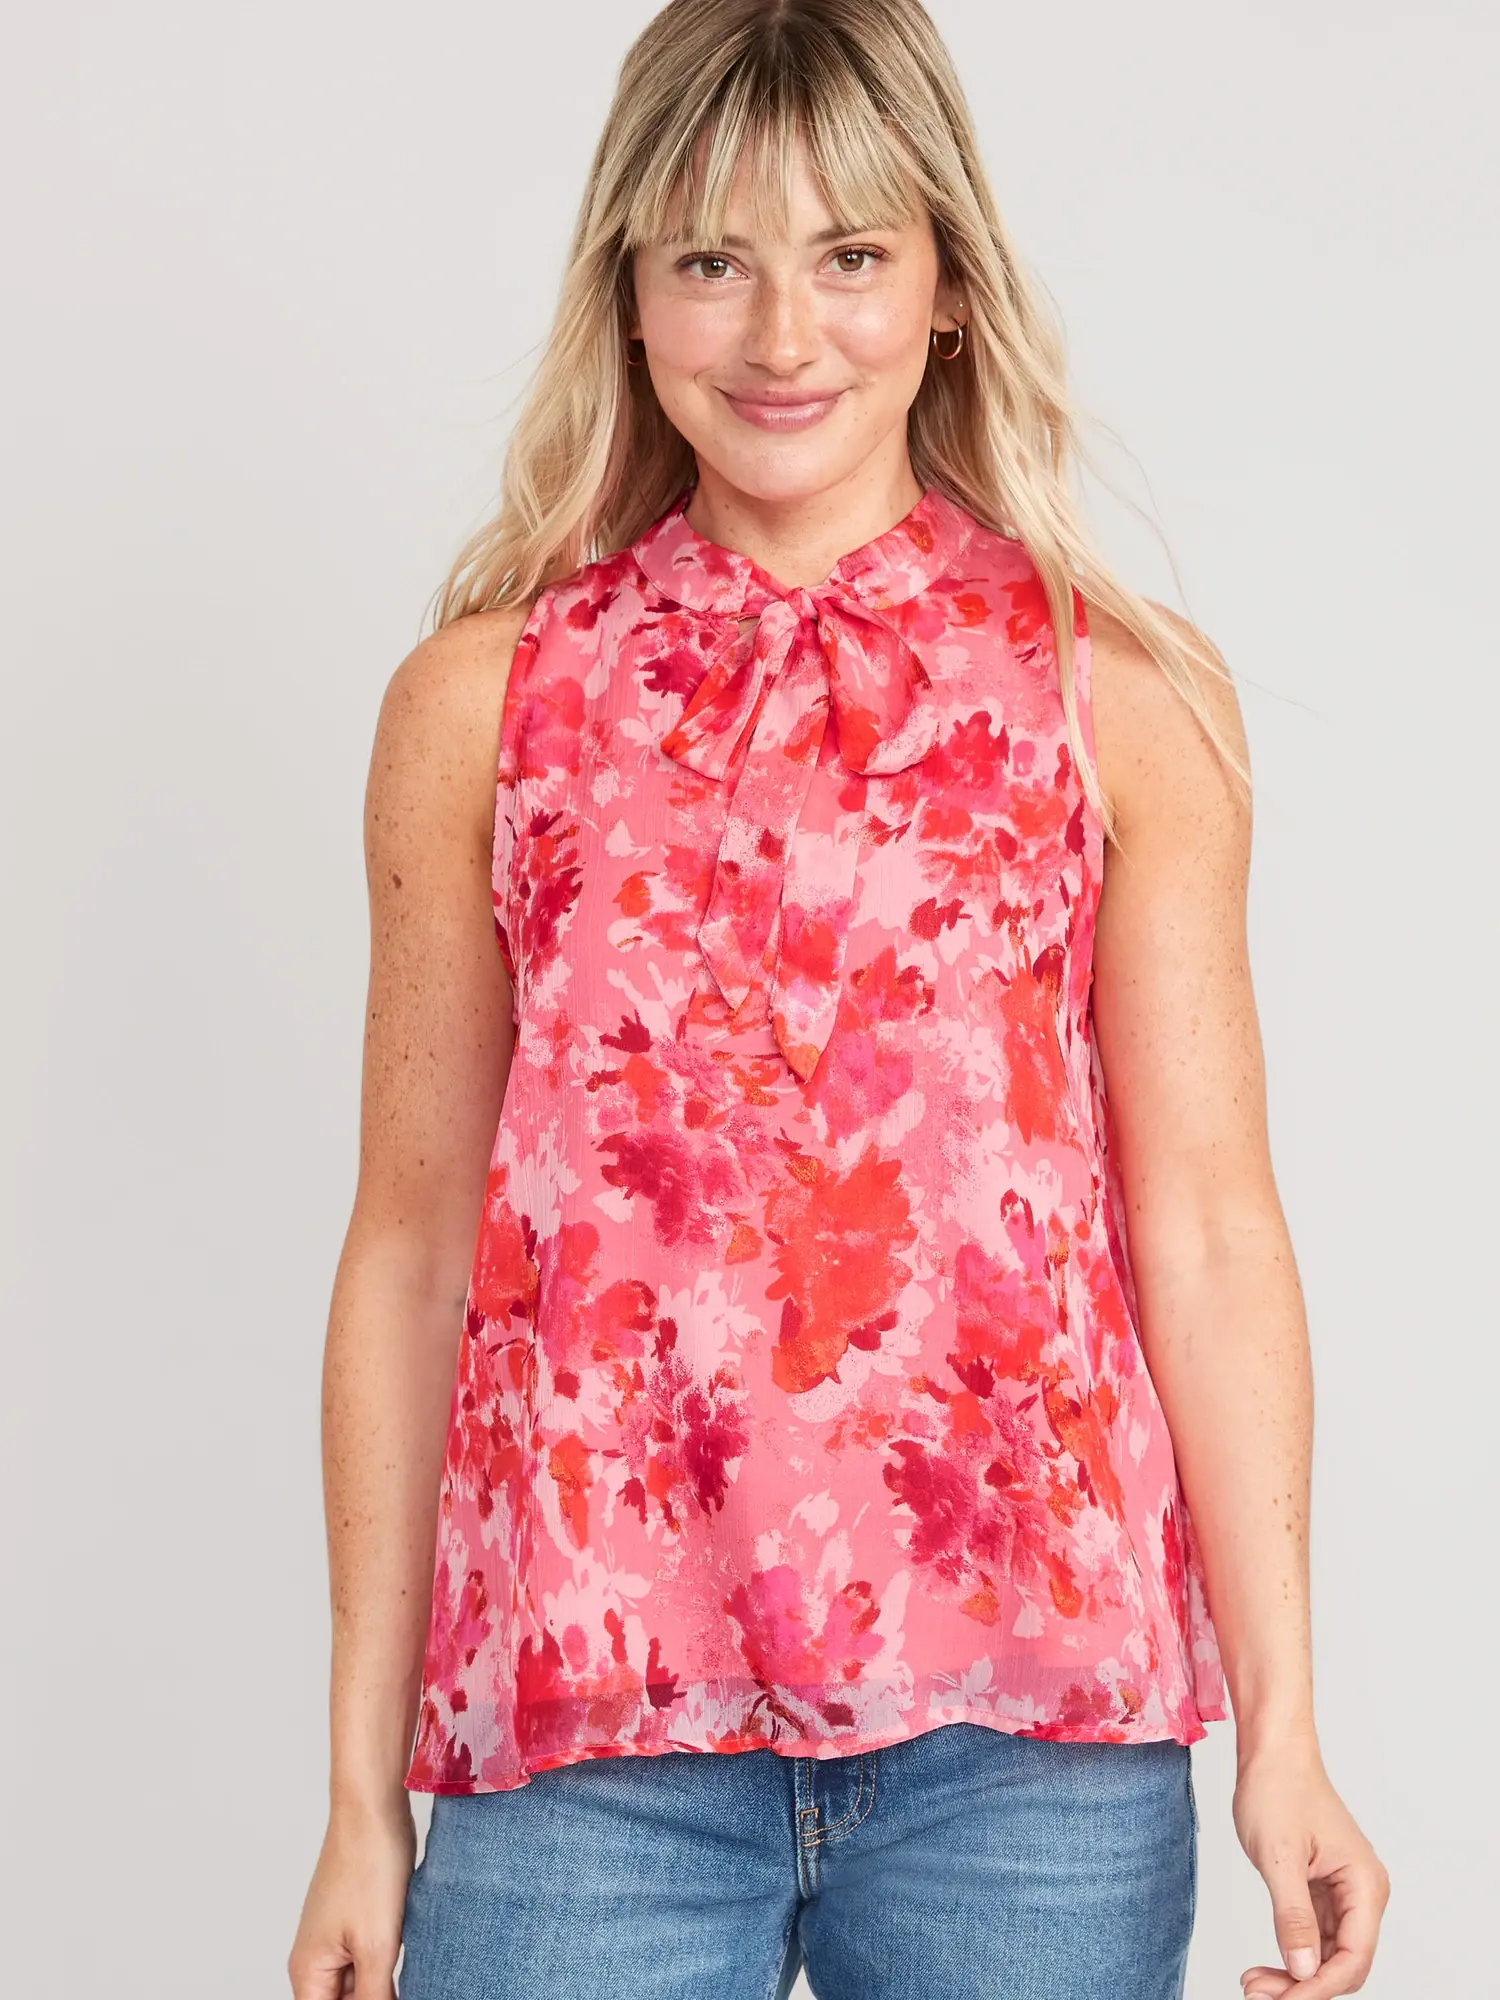 Old Navy High Neck Bow-Front Chiffon Top for Women pink. 1